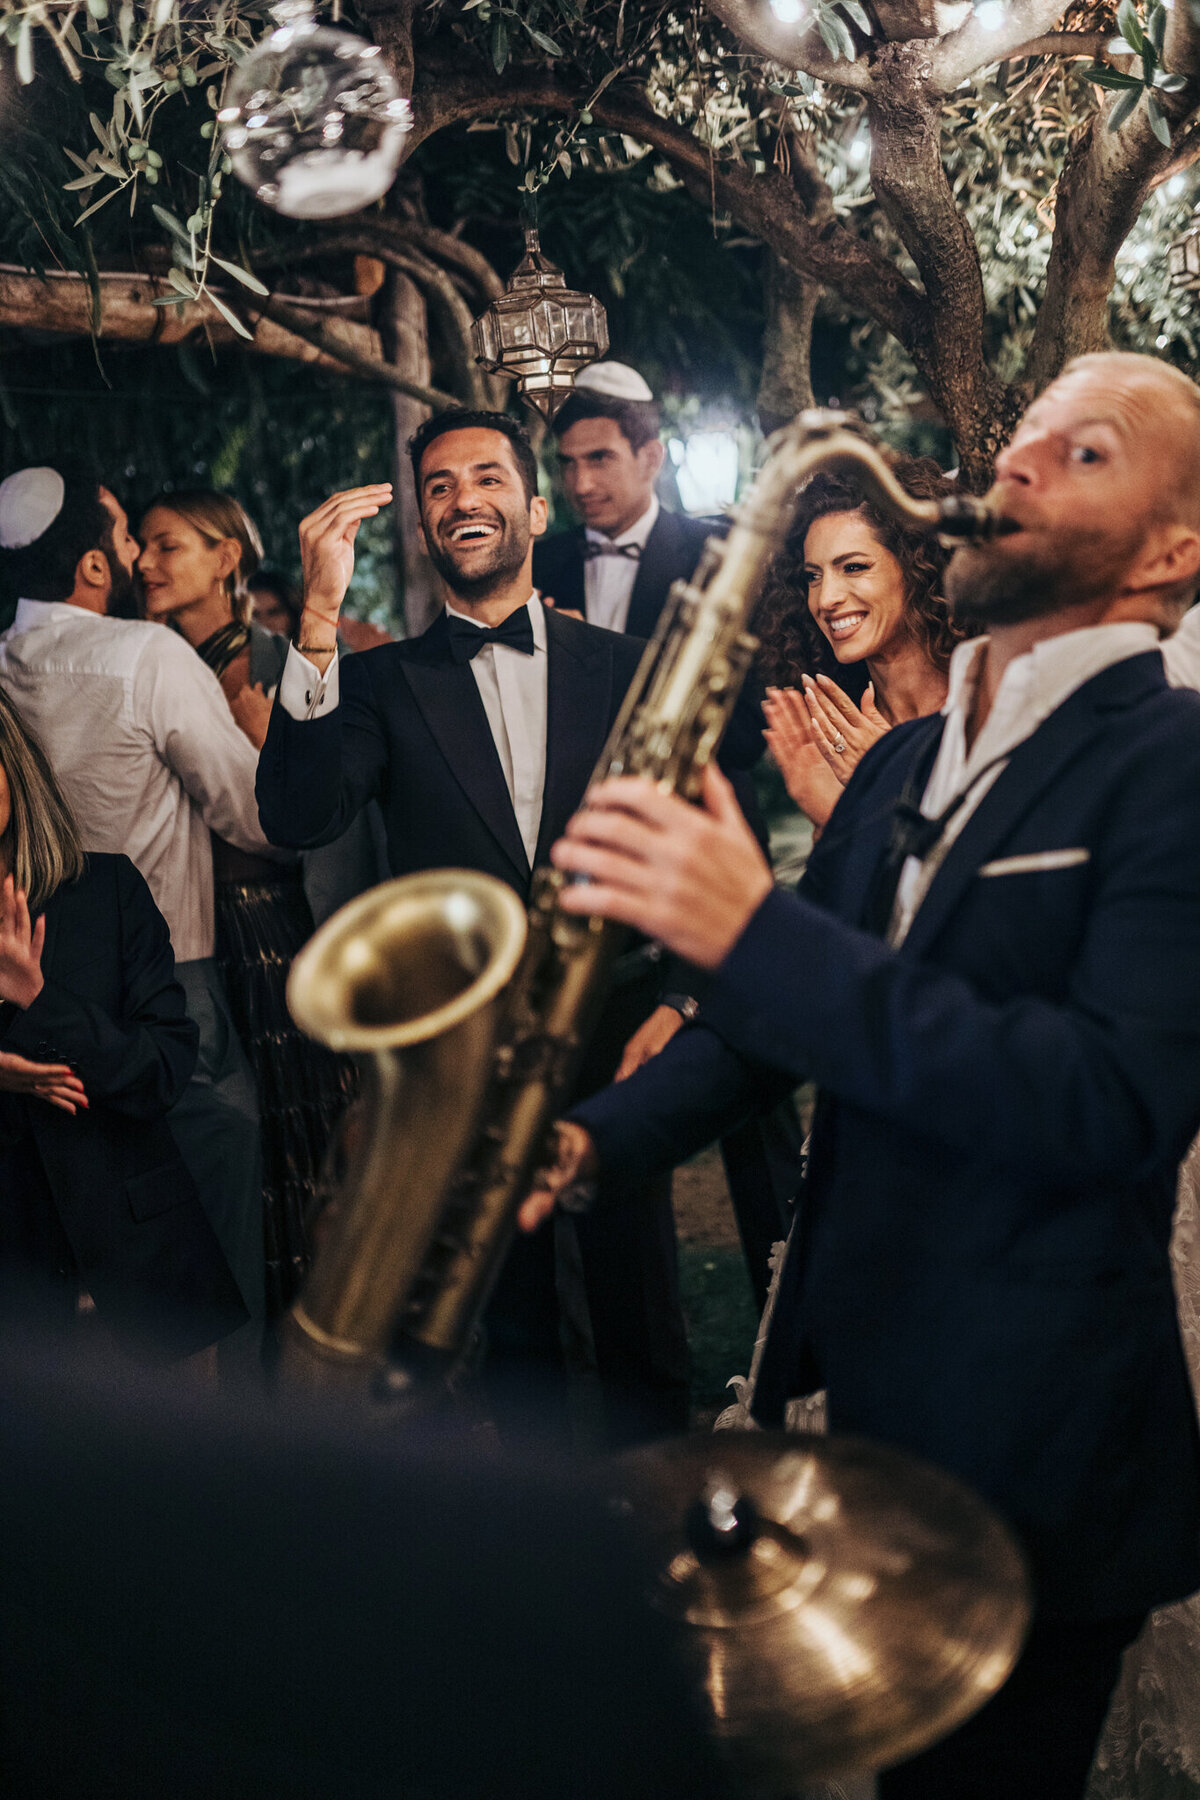 Music entertainment for newlyweds  during wedding in Amalfi caost